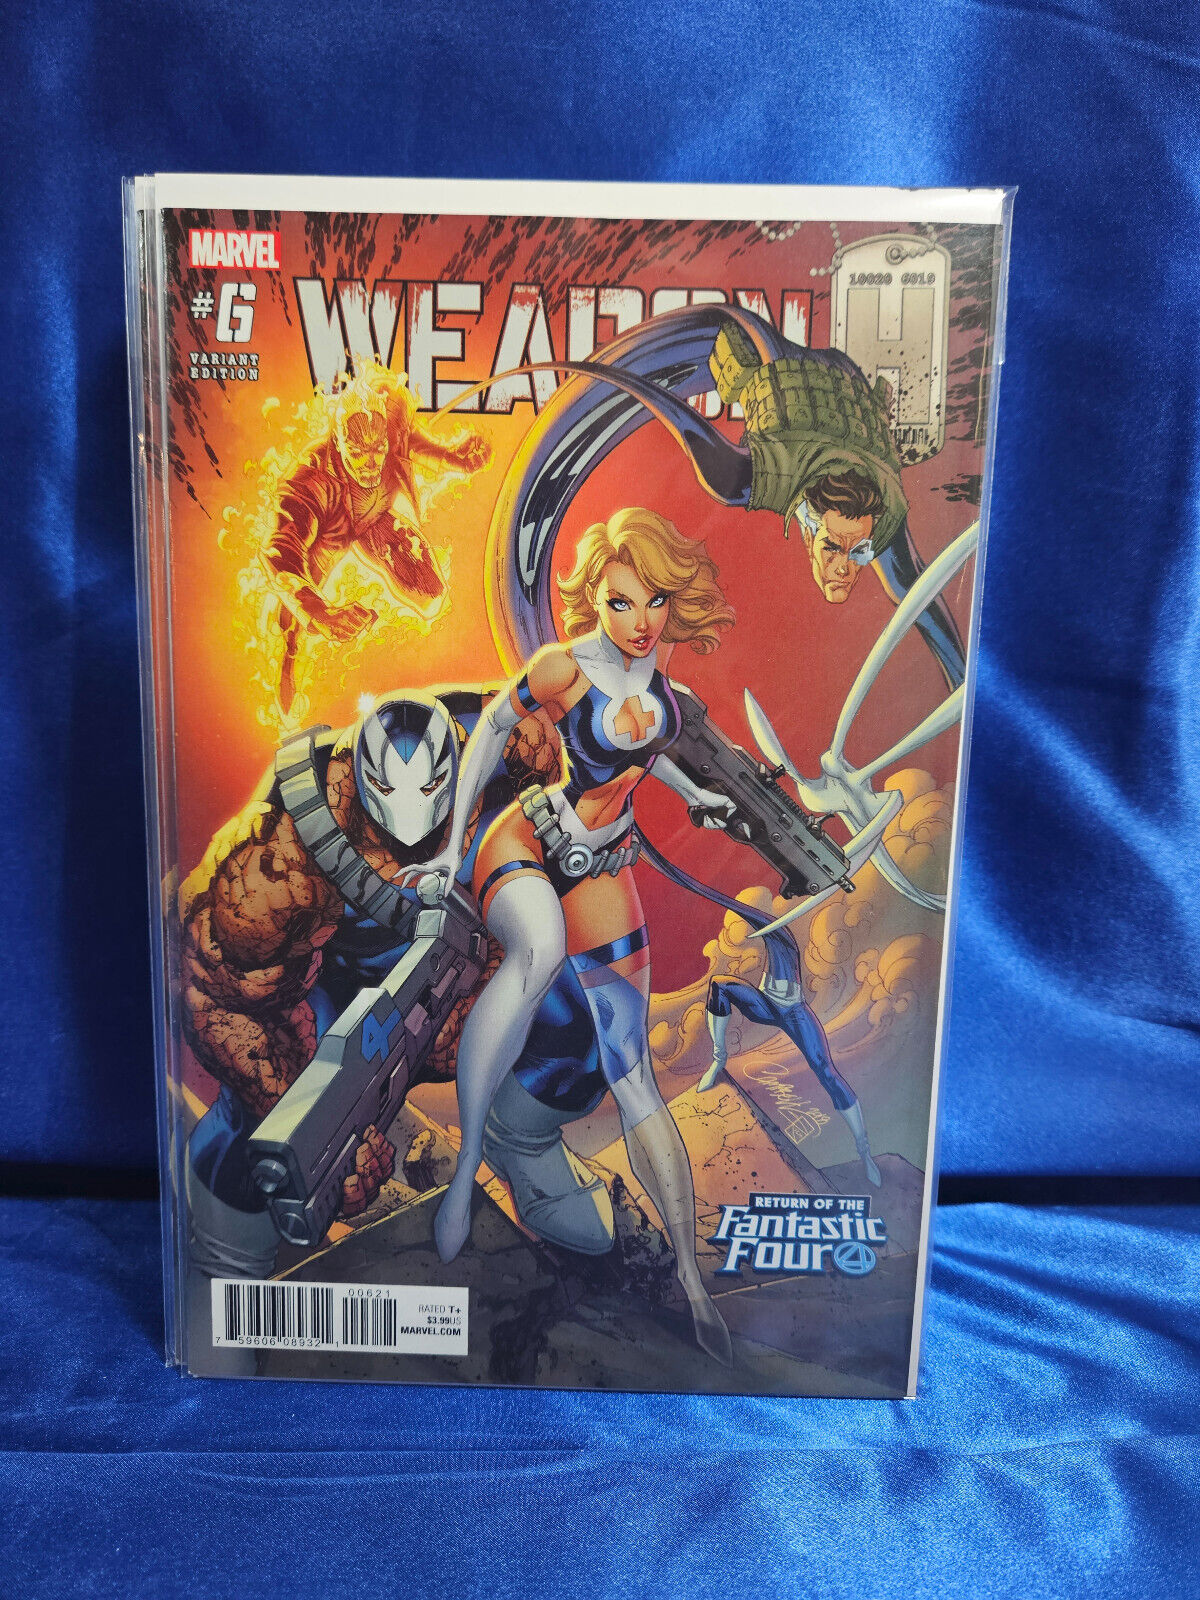 Weapon H #6 J Scott Campbell Return of The Fantastic Four Variant VF/NM 9.0